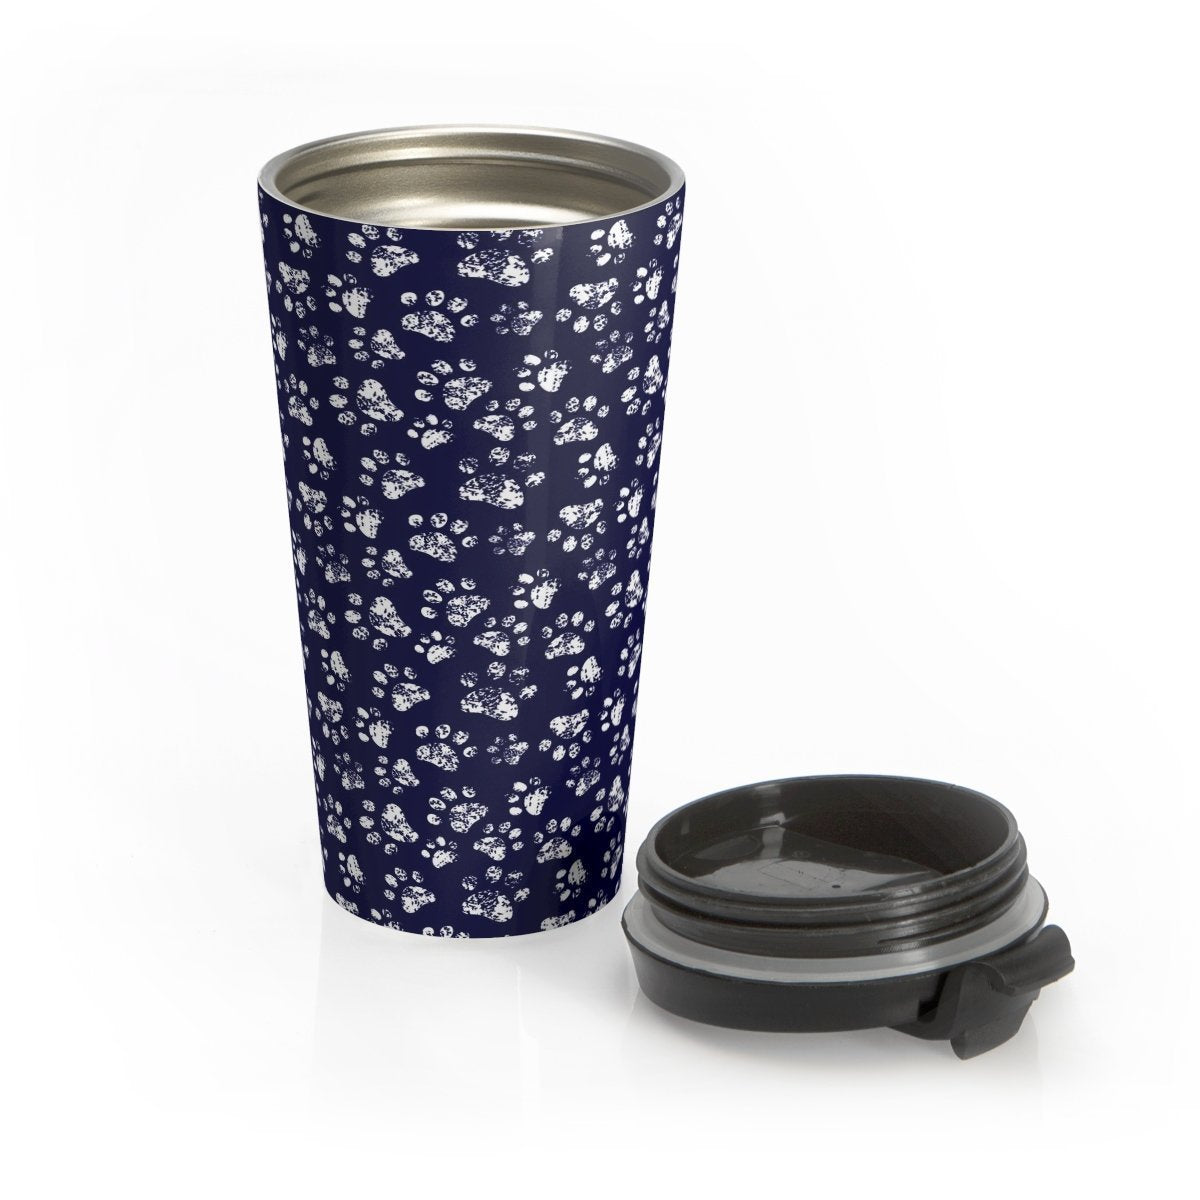 Cute 15oz Stainless Steel Paw Print Travel Mug Perfect as a Unique Gift for Cat Lovers